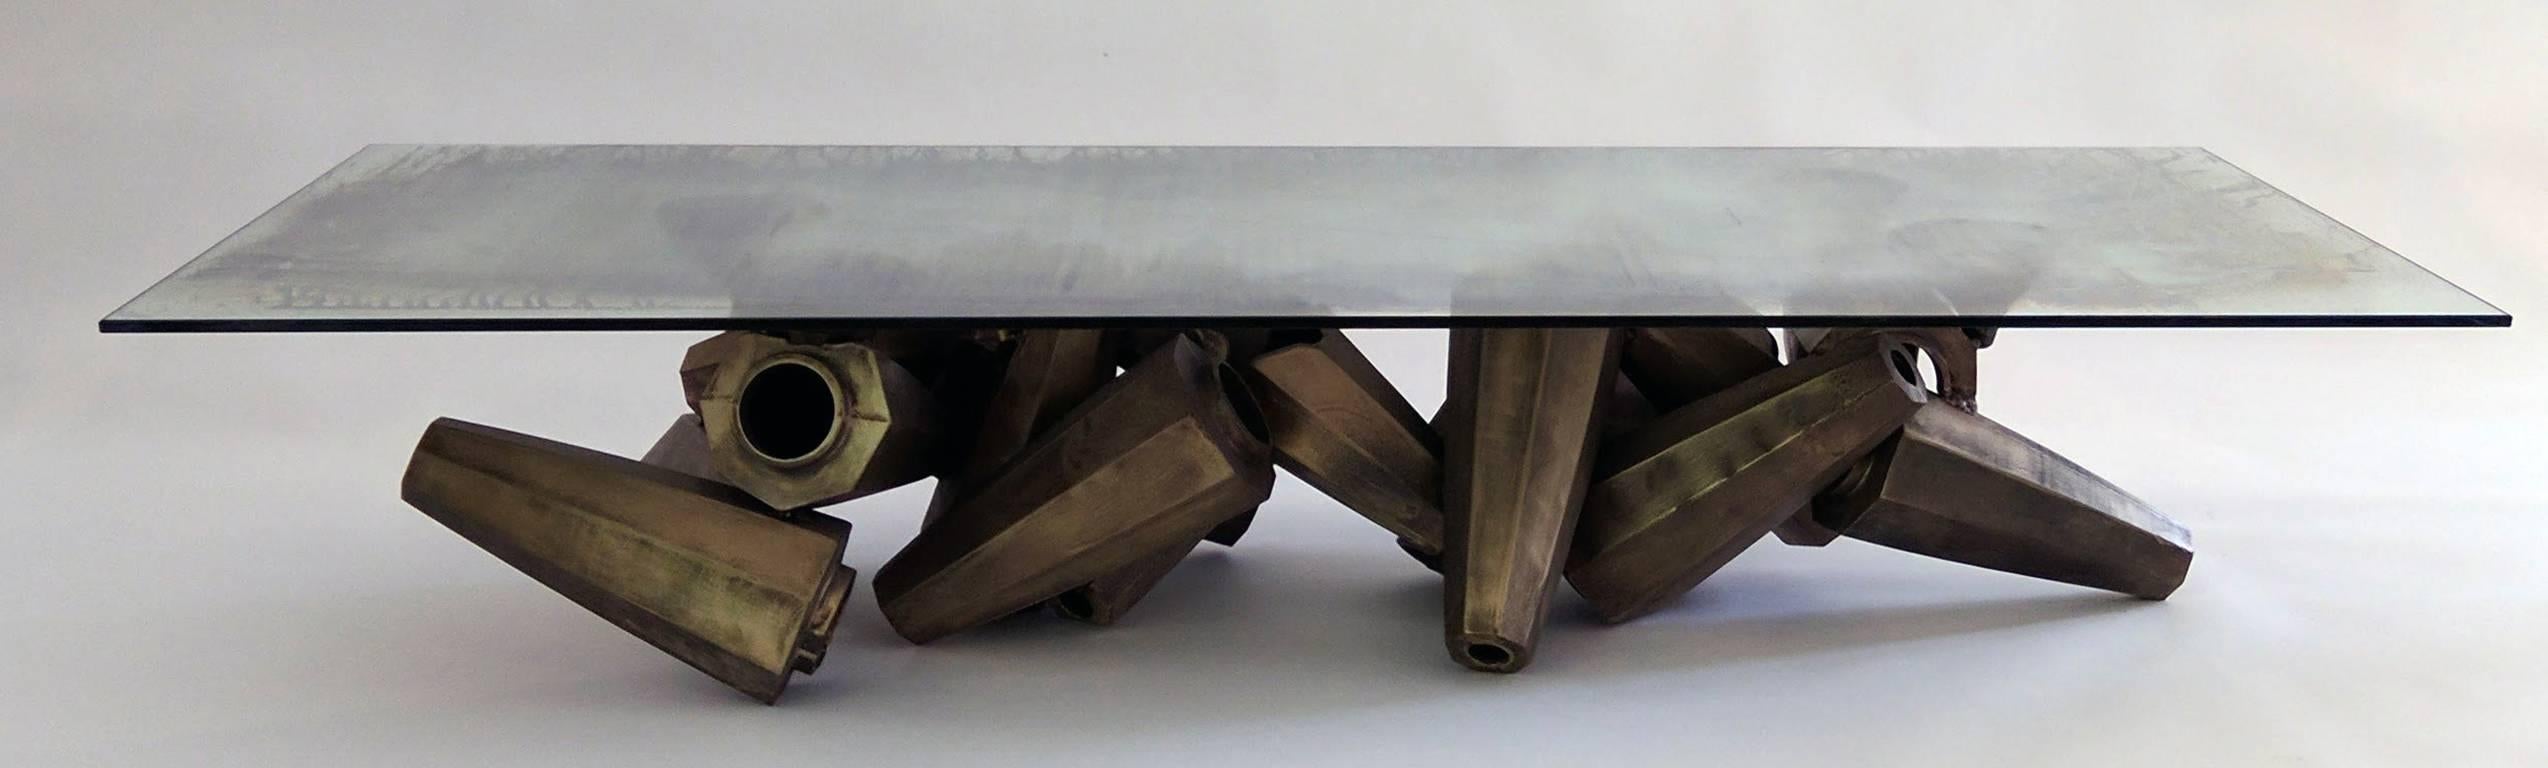 Chaos Table in Silvered Glass and Bronze by Gregory Nangle In New Condition For Sale In Philadelphia, PA